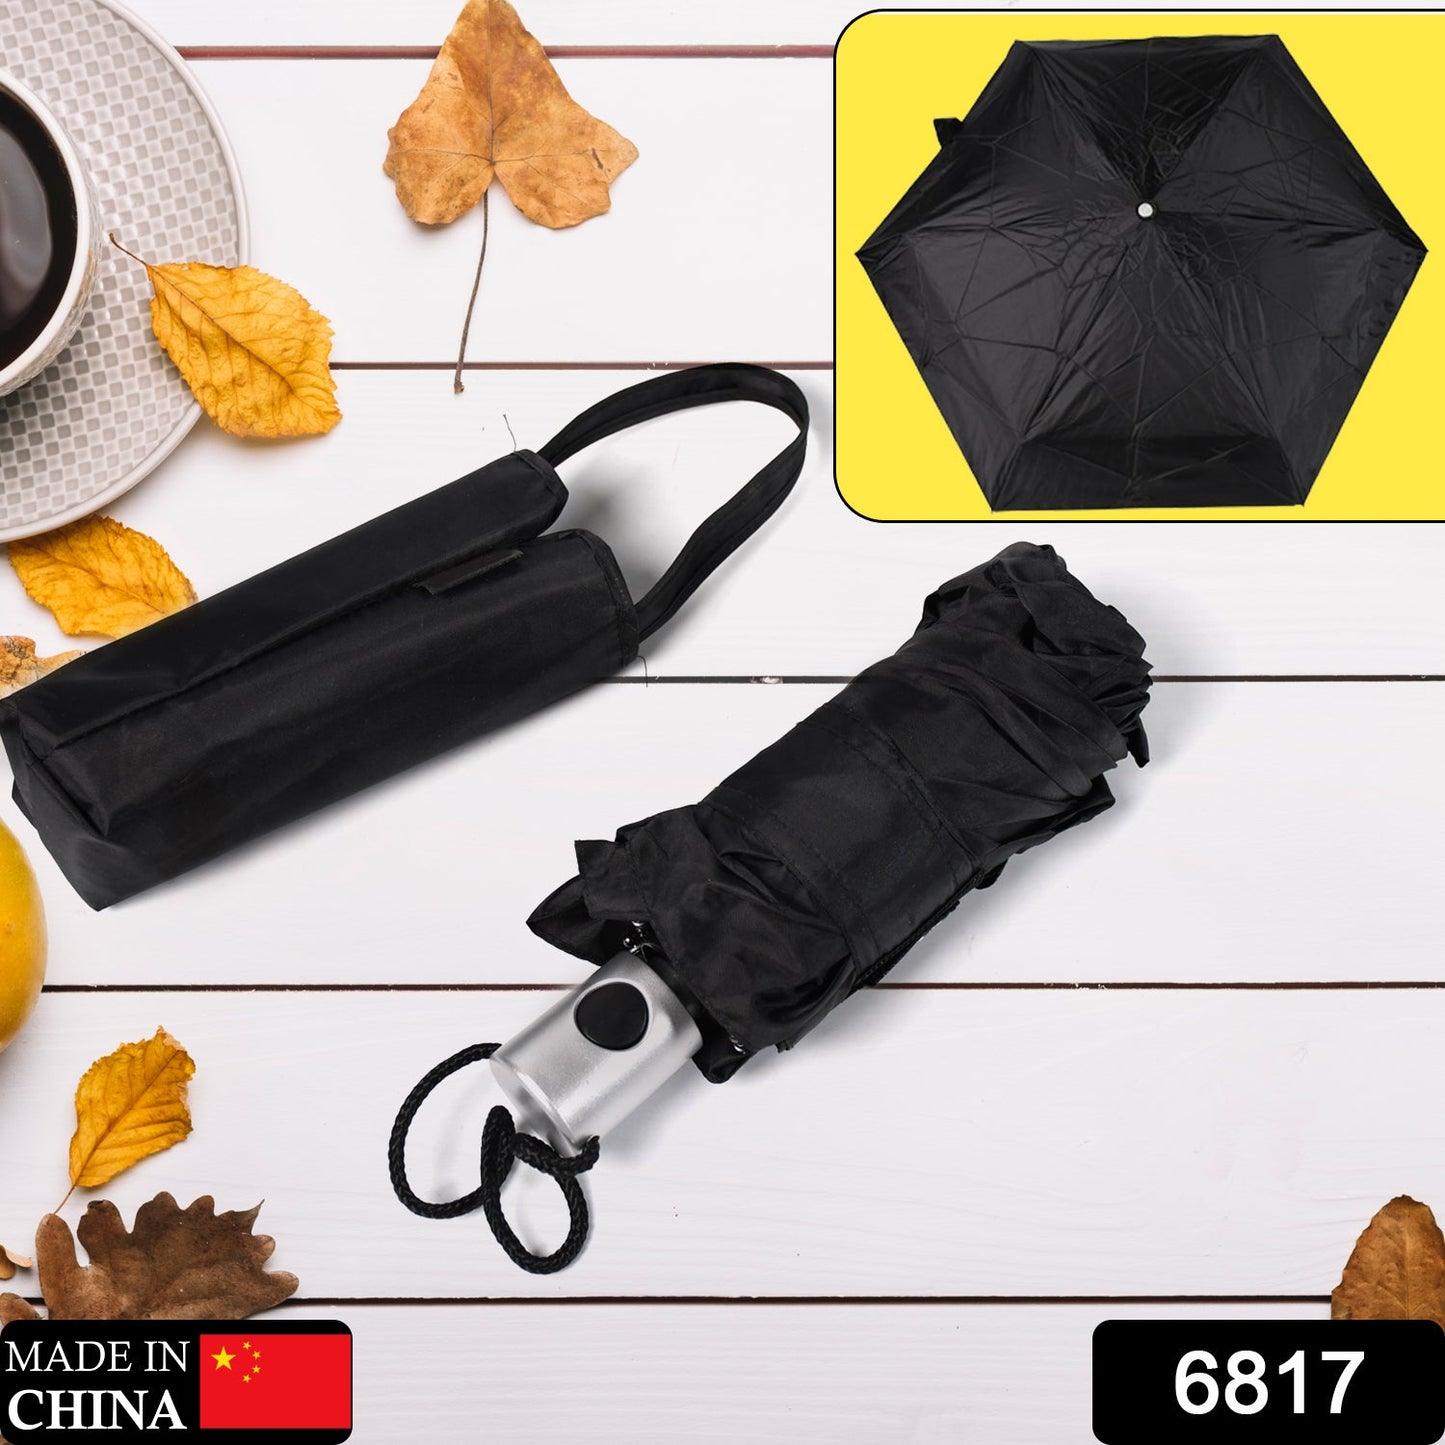 Windproof Travel Umbrella - Compact, Light, Automatic, Strong and Portable - Wind Resistant, Small Folding Backpack Umbrella for Rain